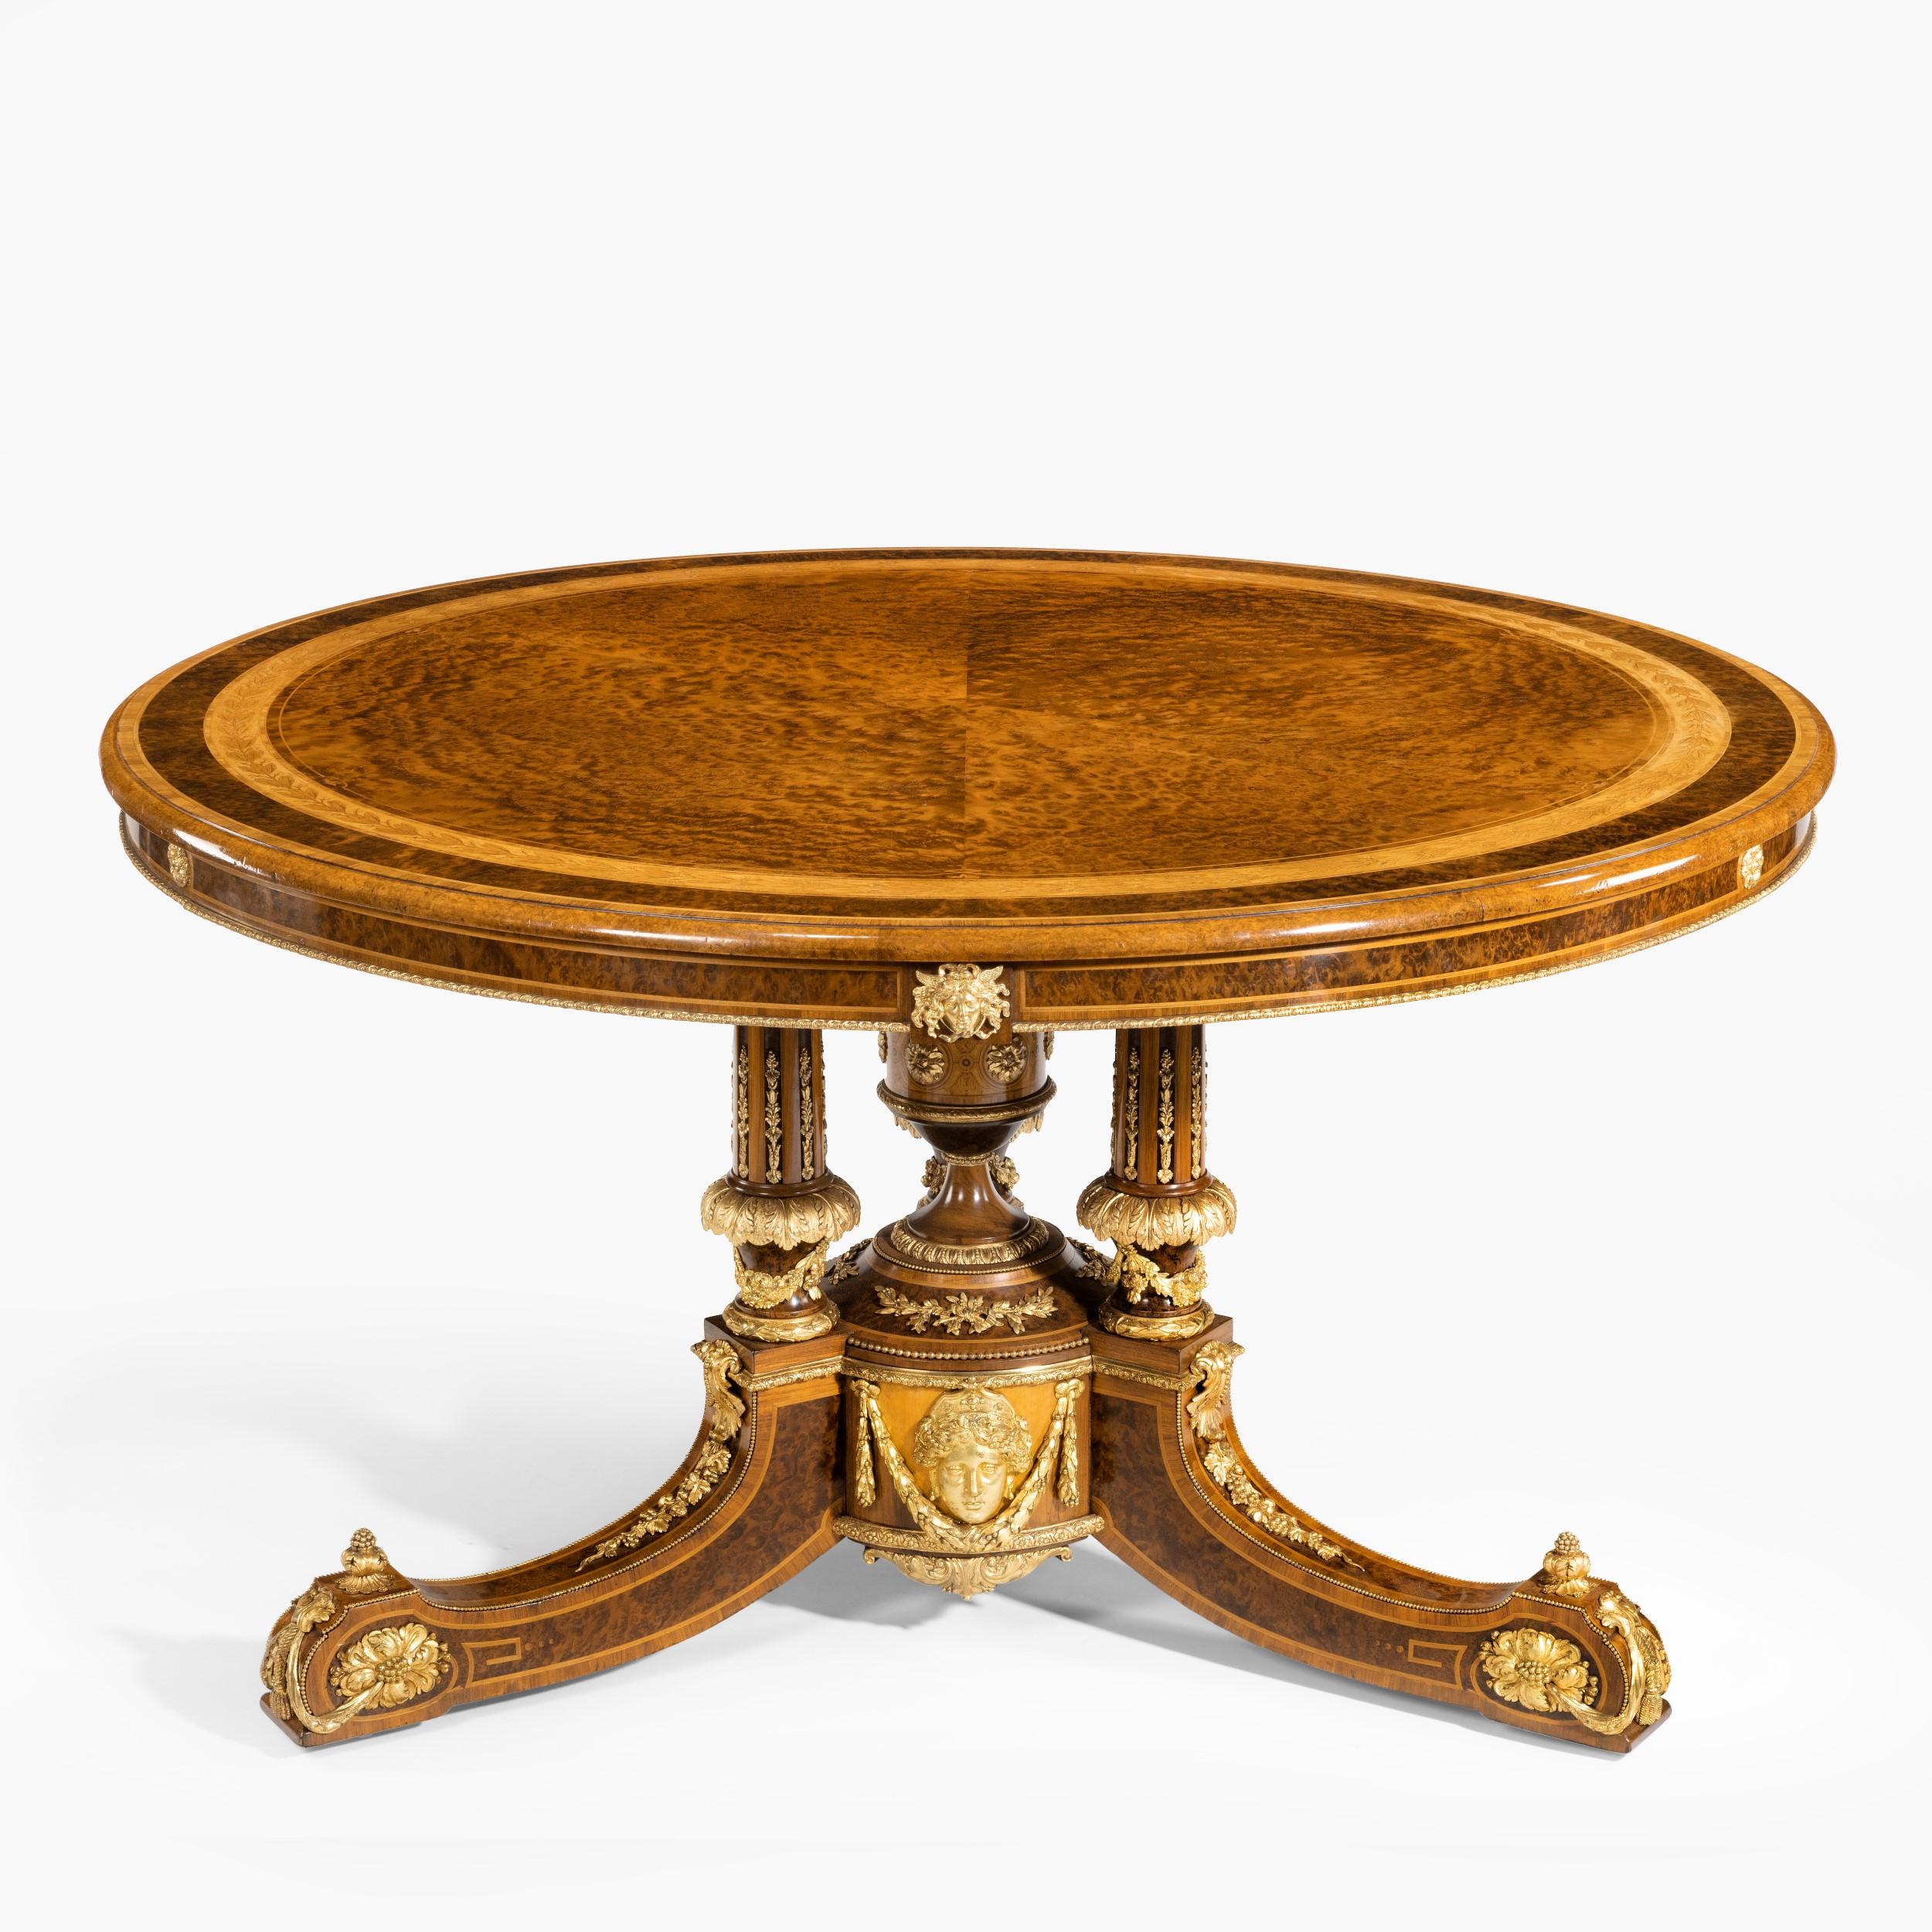 An exhibition quality table
 by Holland & Sons

Constructed in thuyawood, with satinwood and tulipwood used in the cross banding and inlays, and having finely cast ormolu mounts used in counterpoint; the tripartite downswept legs terminating in